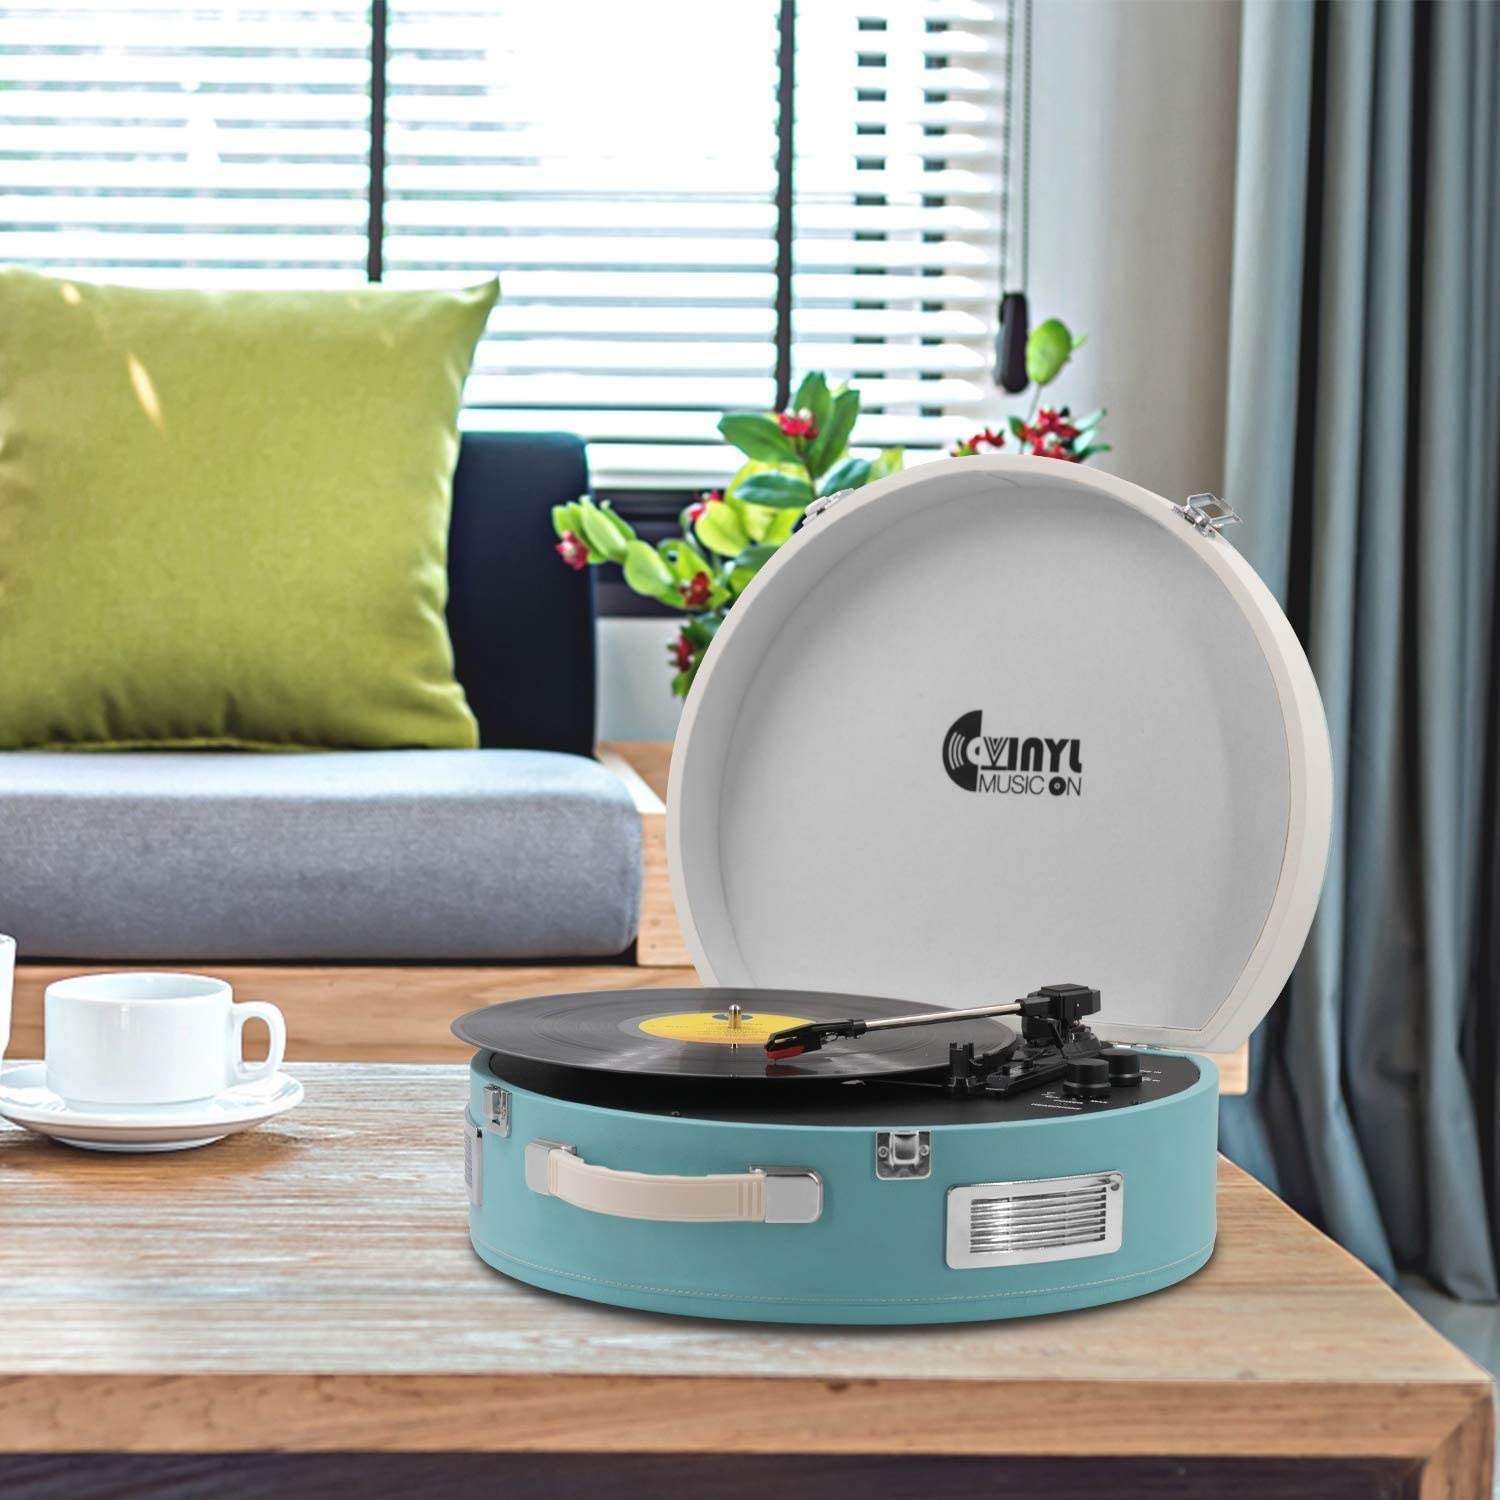 A record player sitting on a low table